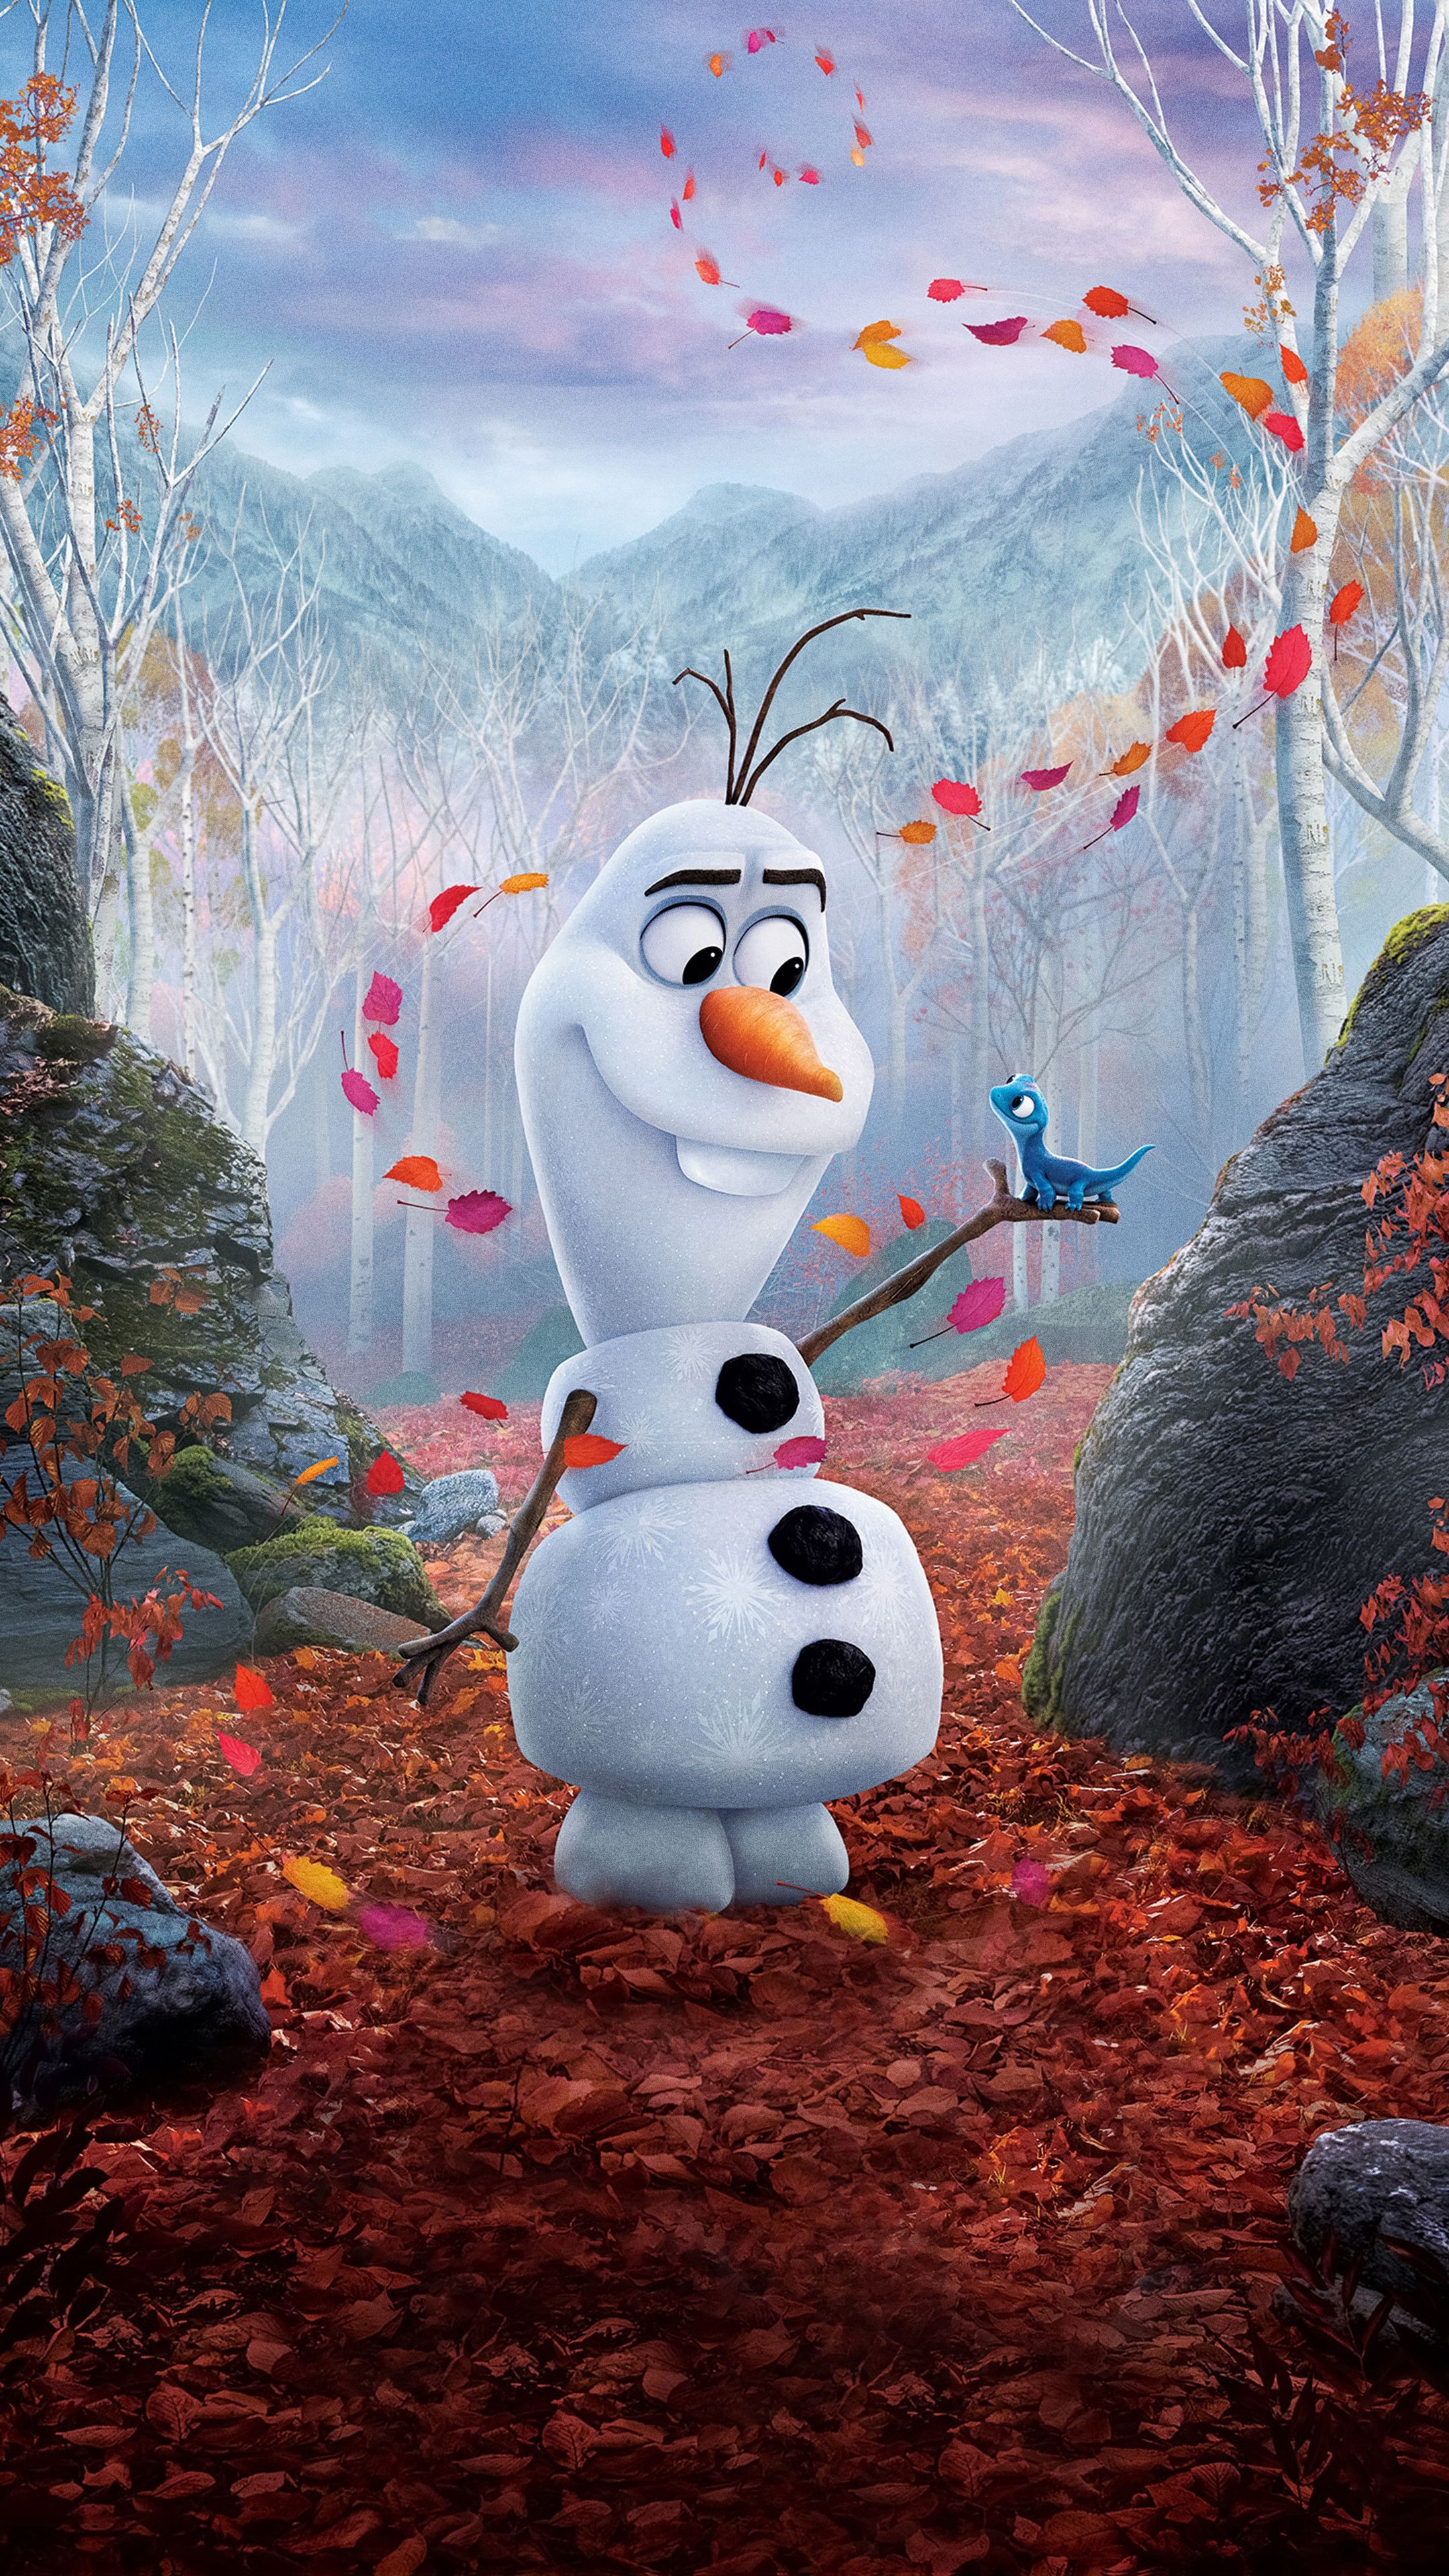 Disney Animation, Olaf in Frozen 2, High-resolution wallpaper, Disney character, 2160x3840 4K Phone